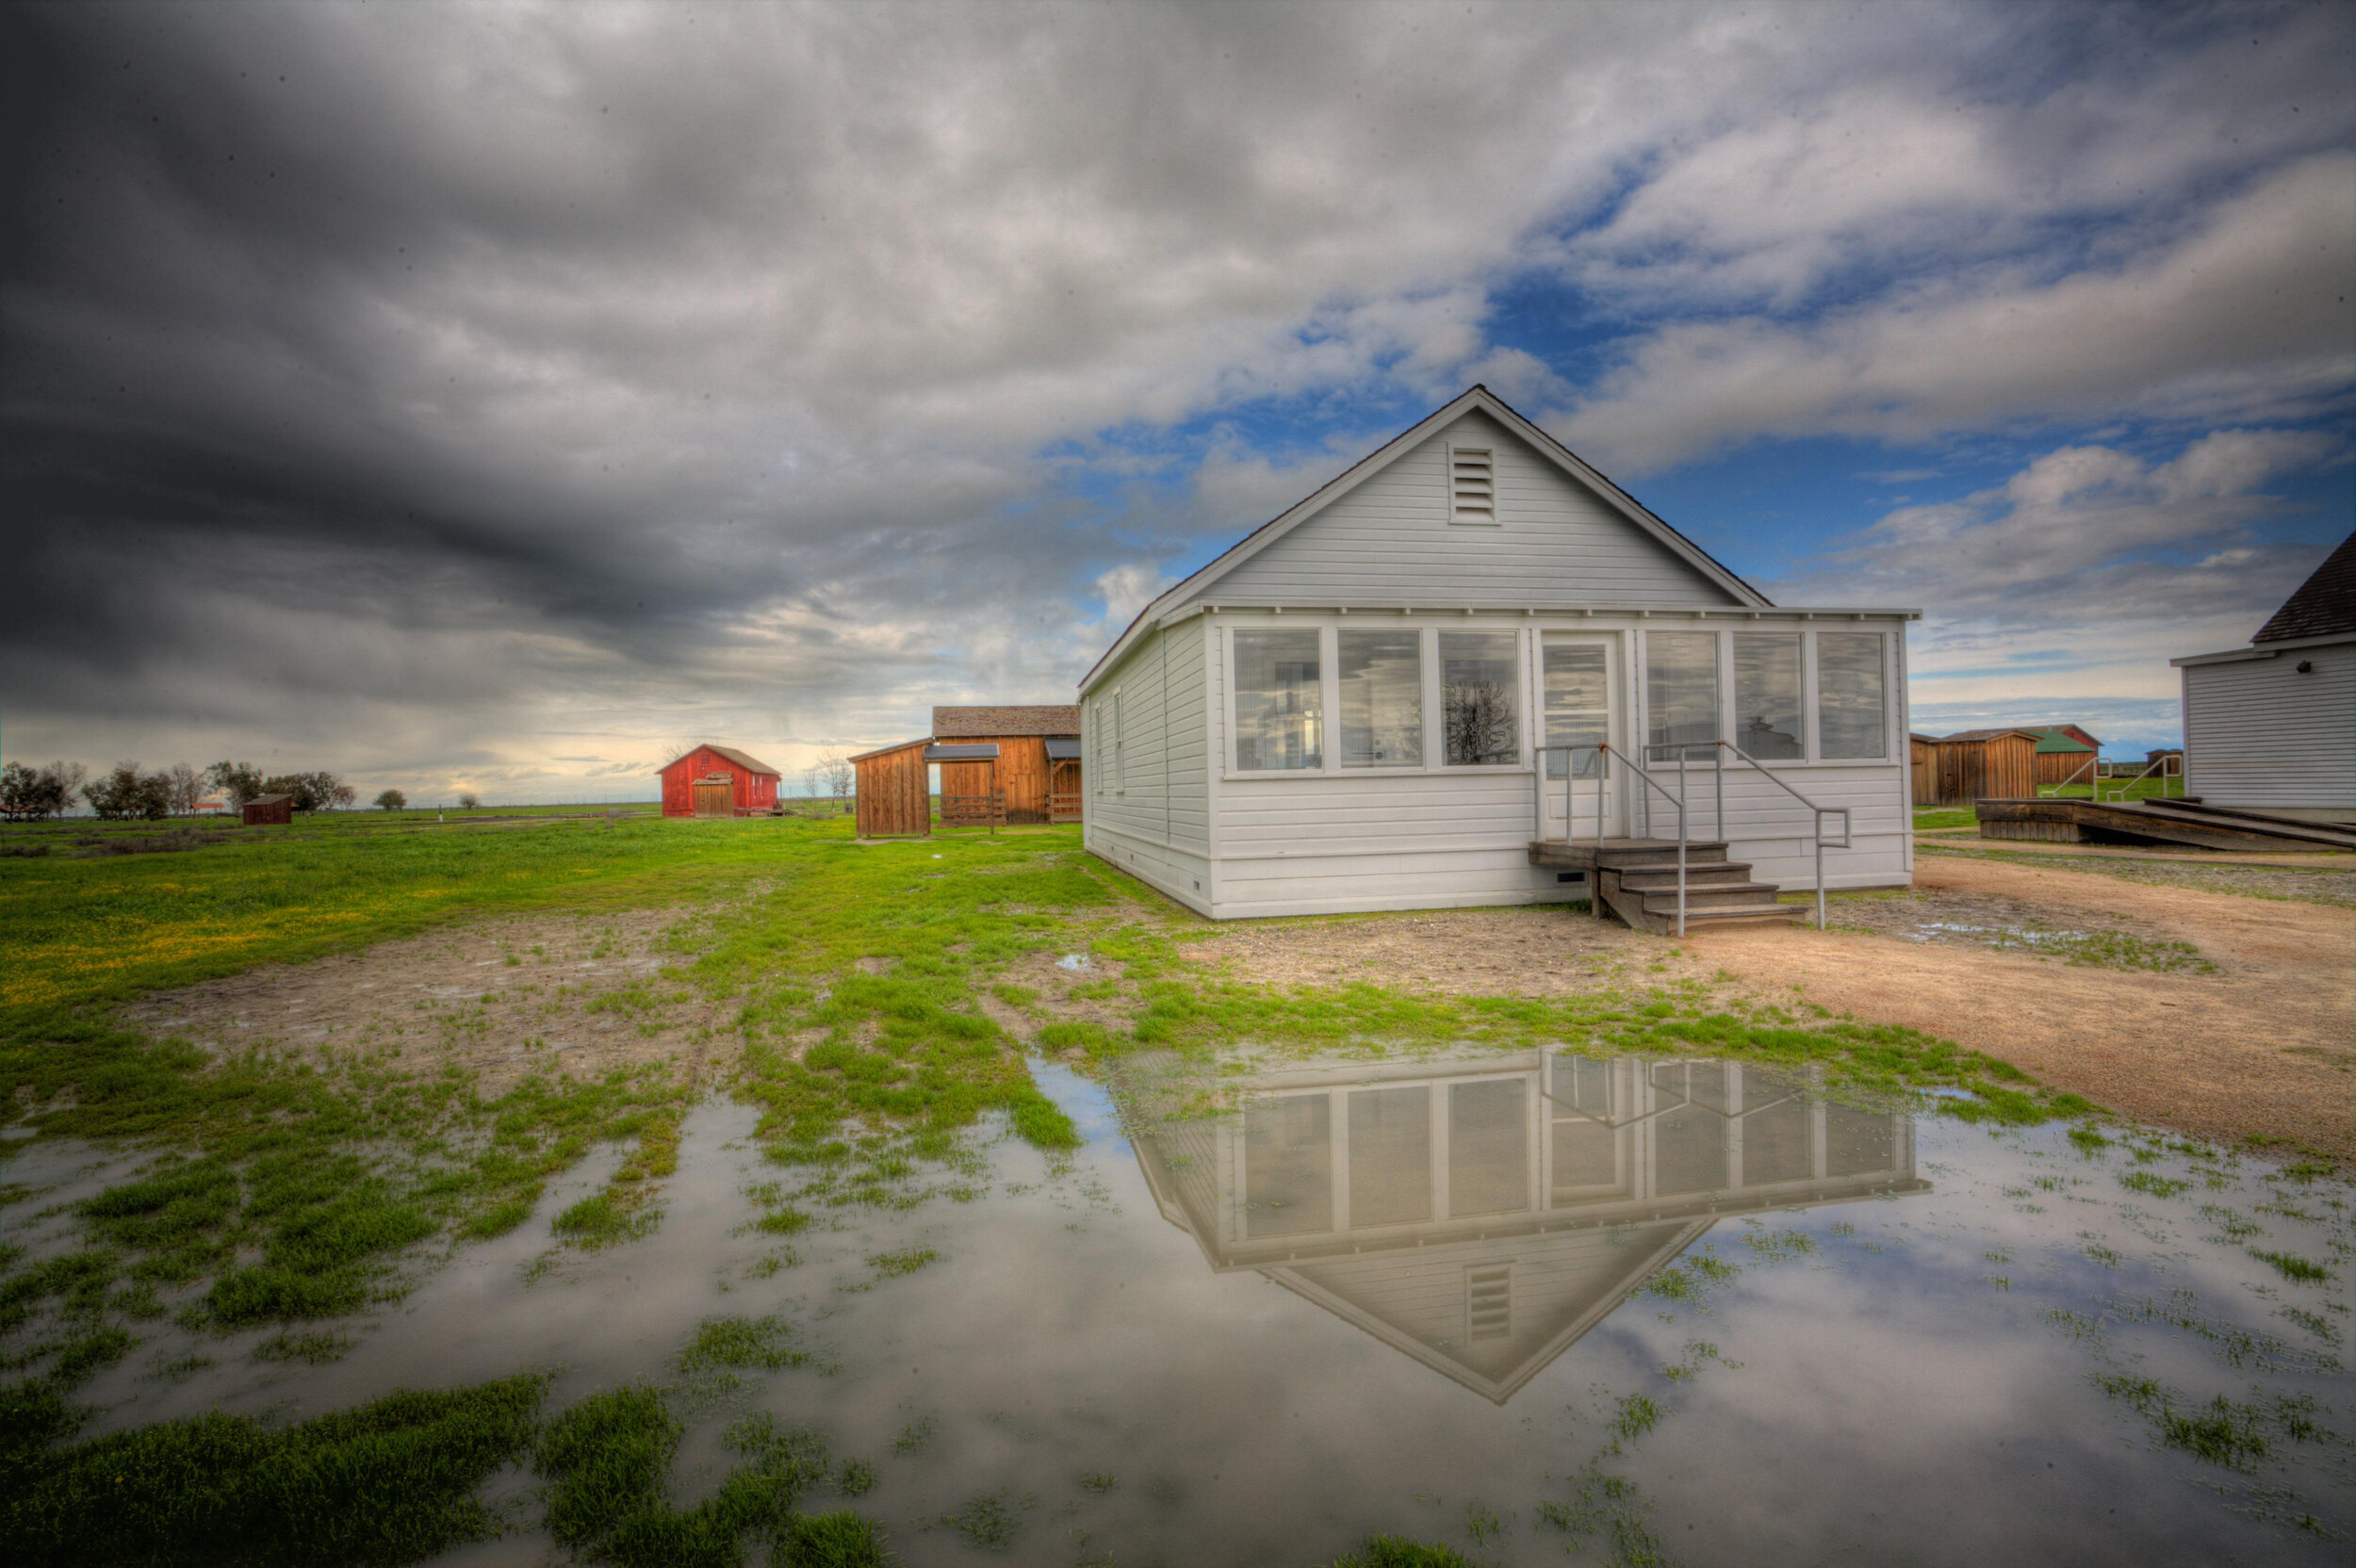  Allensworth as it is today. Photo: “Stormy Reflection”  by David Green . 